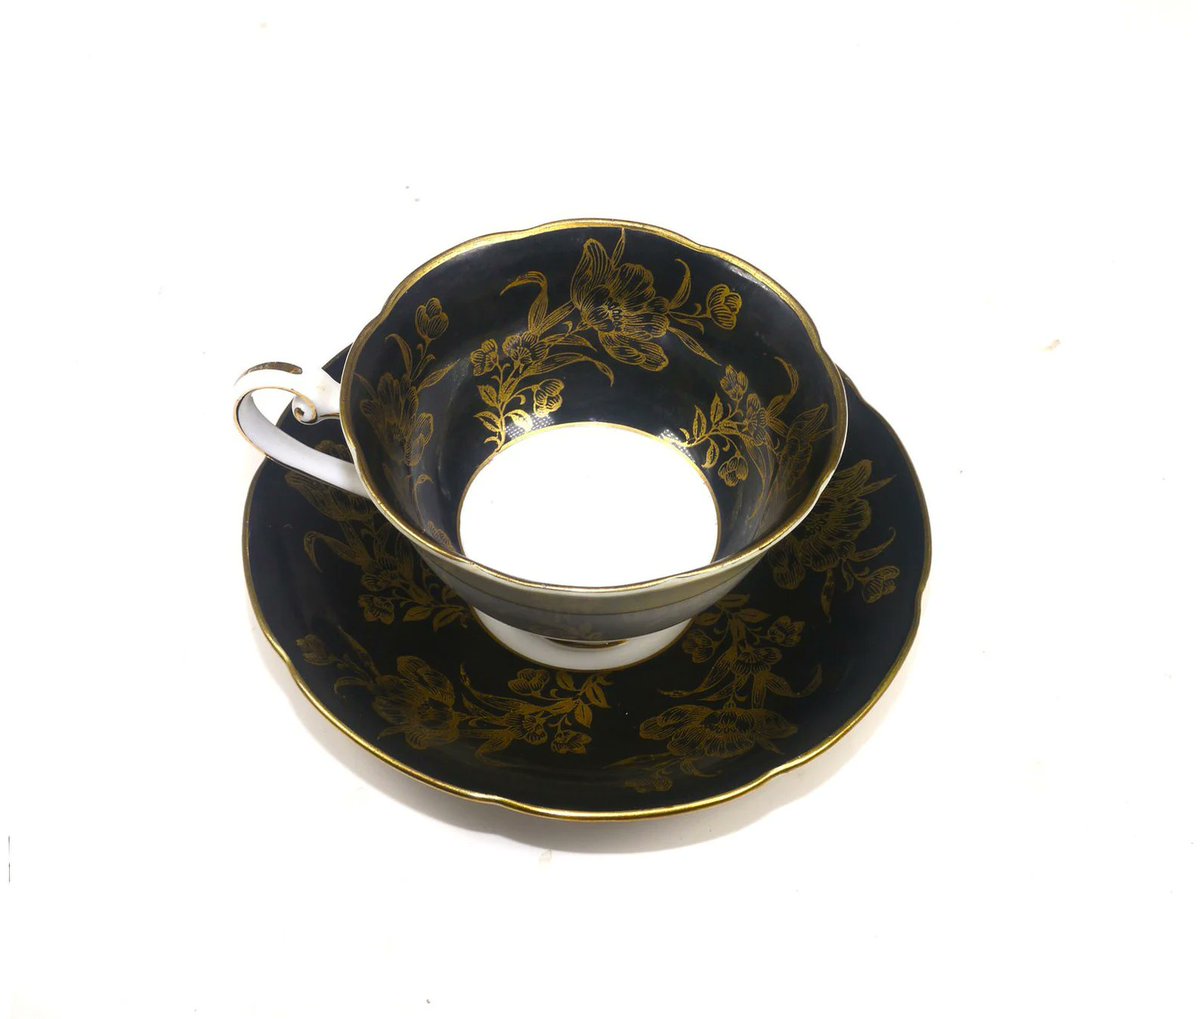 Woodville China black and gold florals cup and saucer set. Bone china Japan. etsy.me/4dBFPSU via @Etsy #BuyfromGroovy #antiqueshop #tableware #tabledecor #teatime #teaset #WoodvilleChina #Woodvilleblackgold #giftformom #MothersDay #EtsySellers